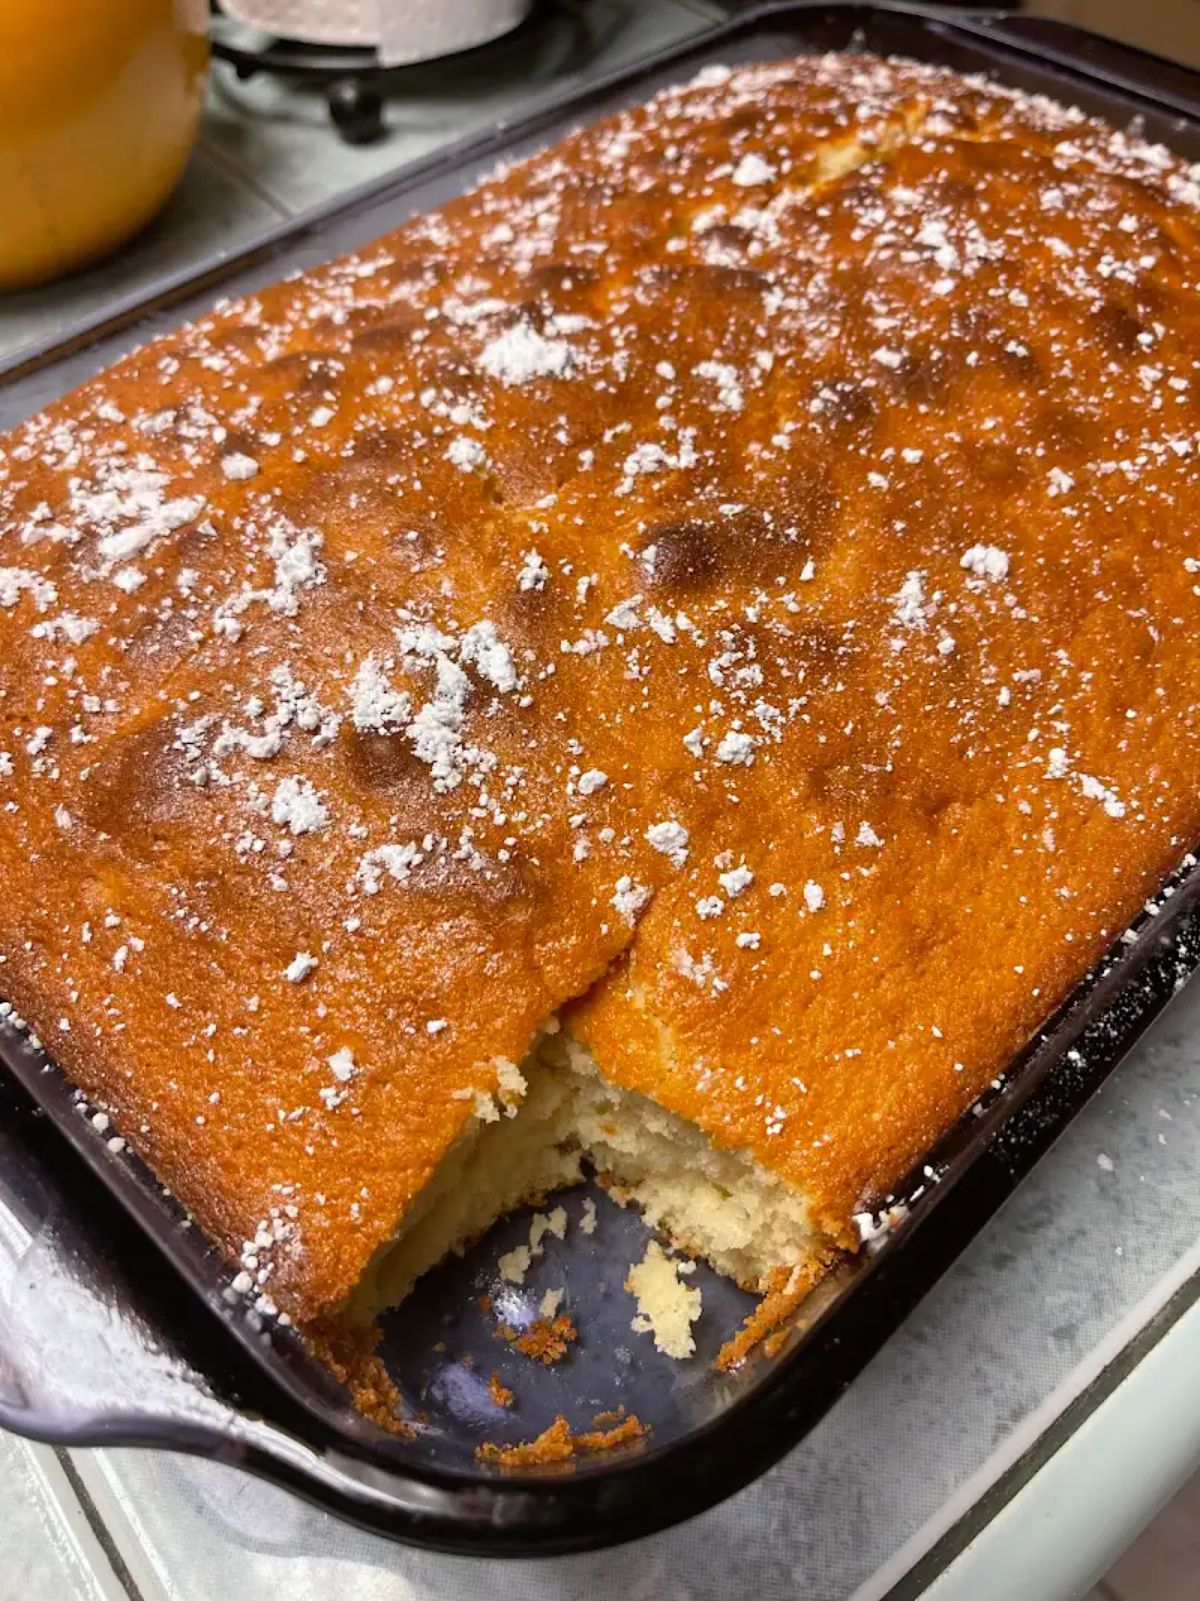 Tasty Mama's Southern Sweet Bread in a baking tray.